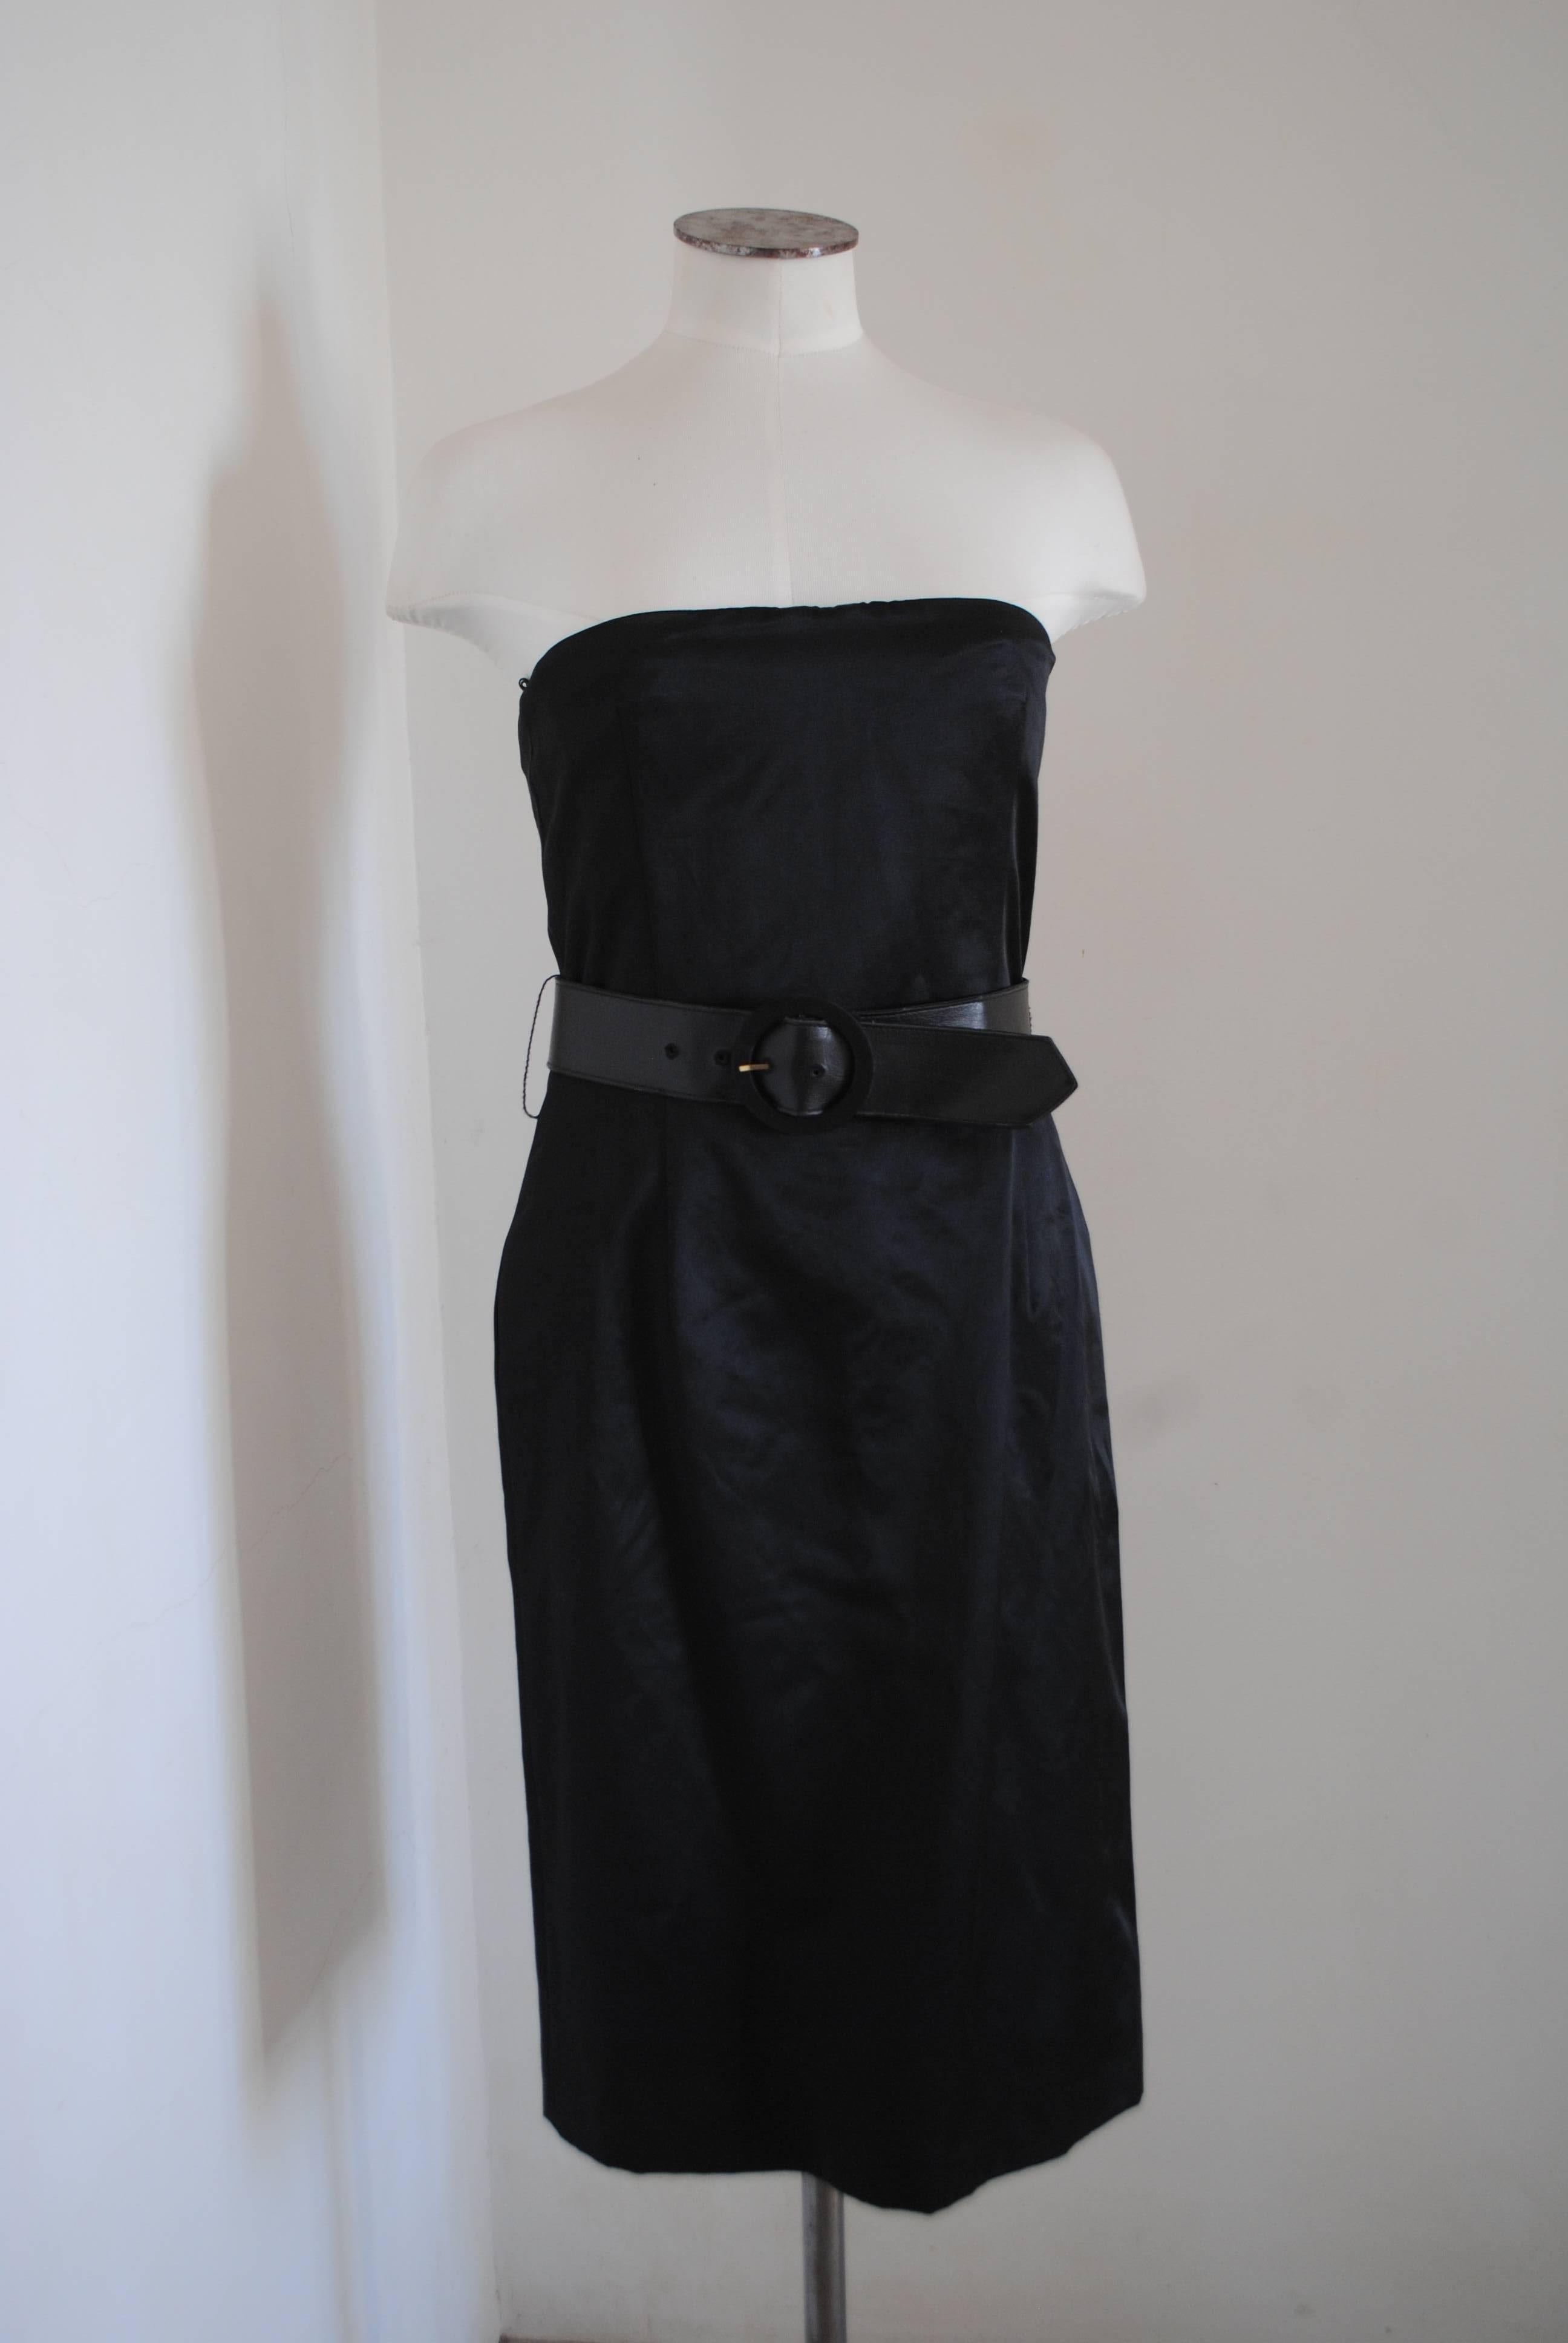 Mcq by Alexander McQueen Black dress with Leather belt
NWOT
Totally made in italy in size M 